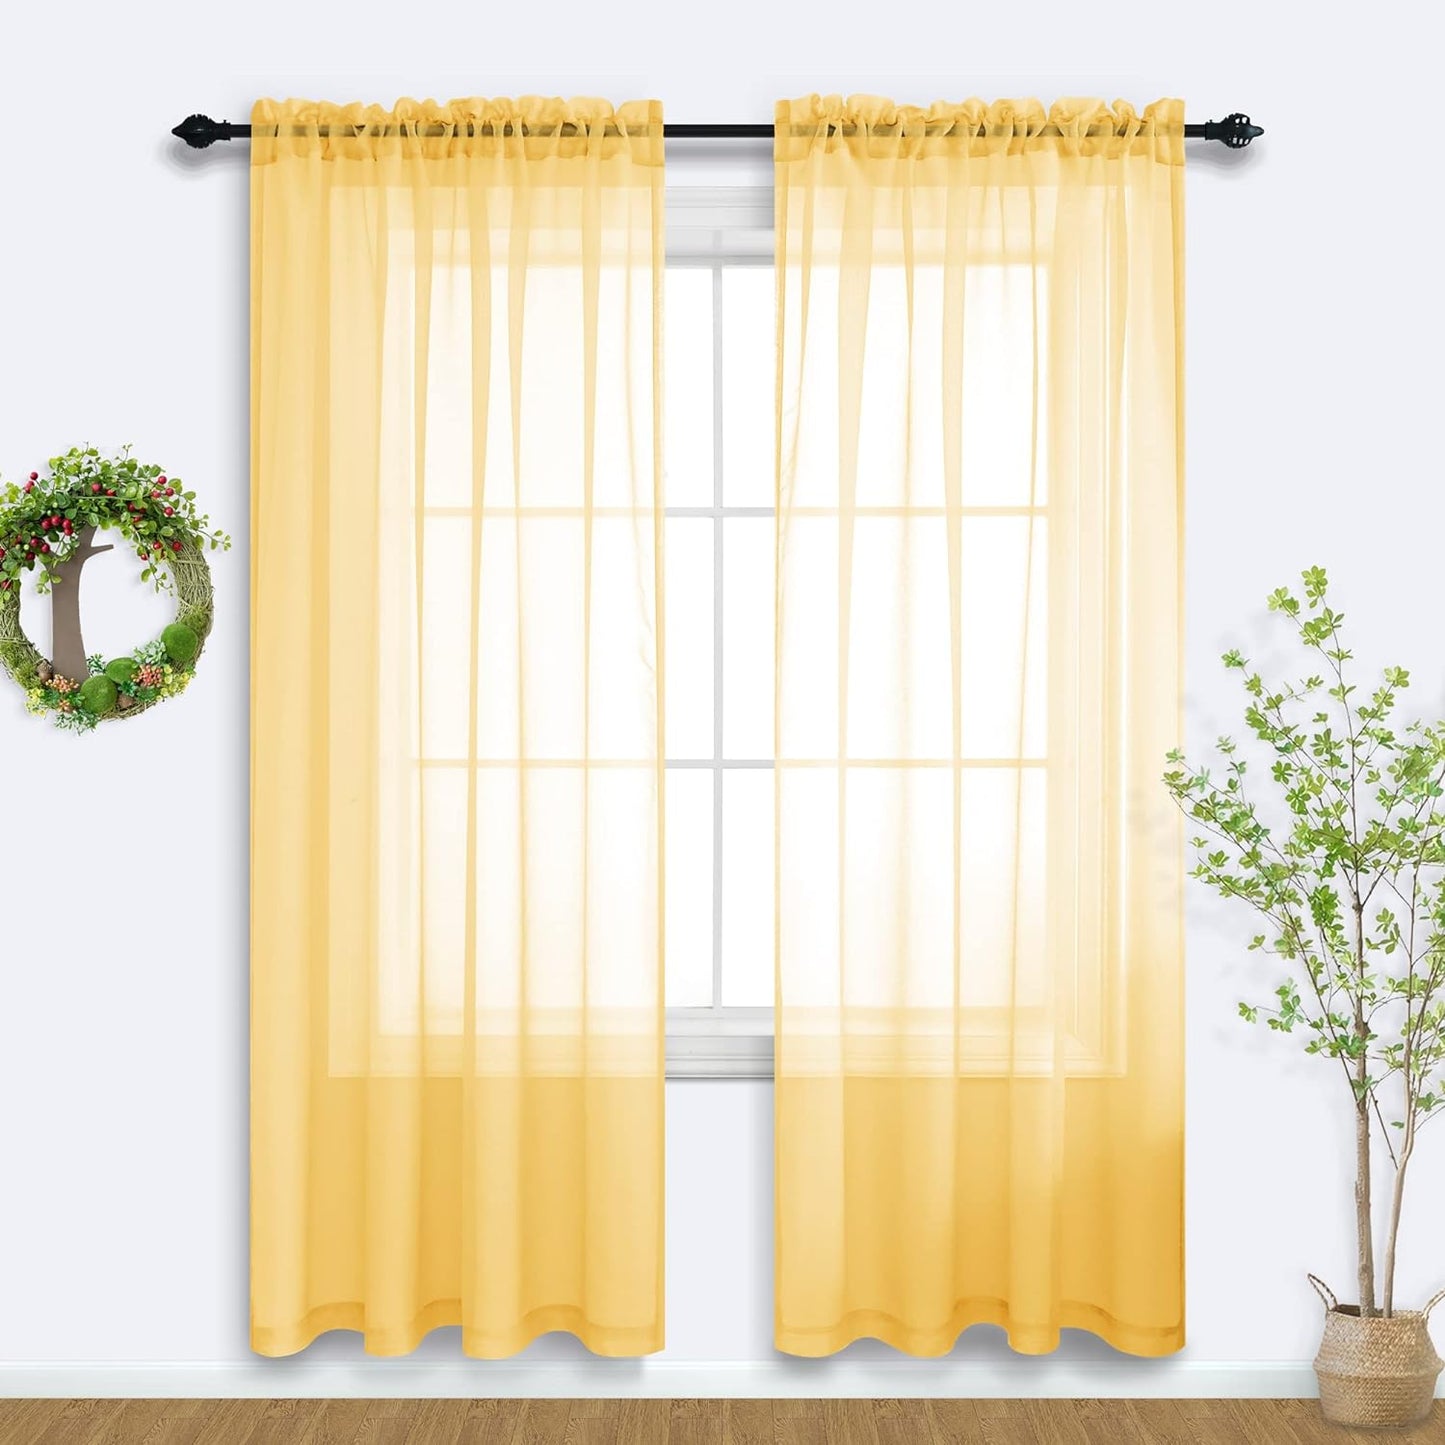 Terracotta Curtains 84 Inch Length for Living Room 2 Panel Sets Rod Pocket Sheer Curtains for Living Room Rust Burnt Orange Red  PITALK TEXTILE Yellow 52X84 